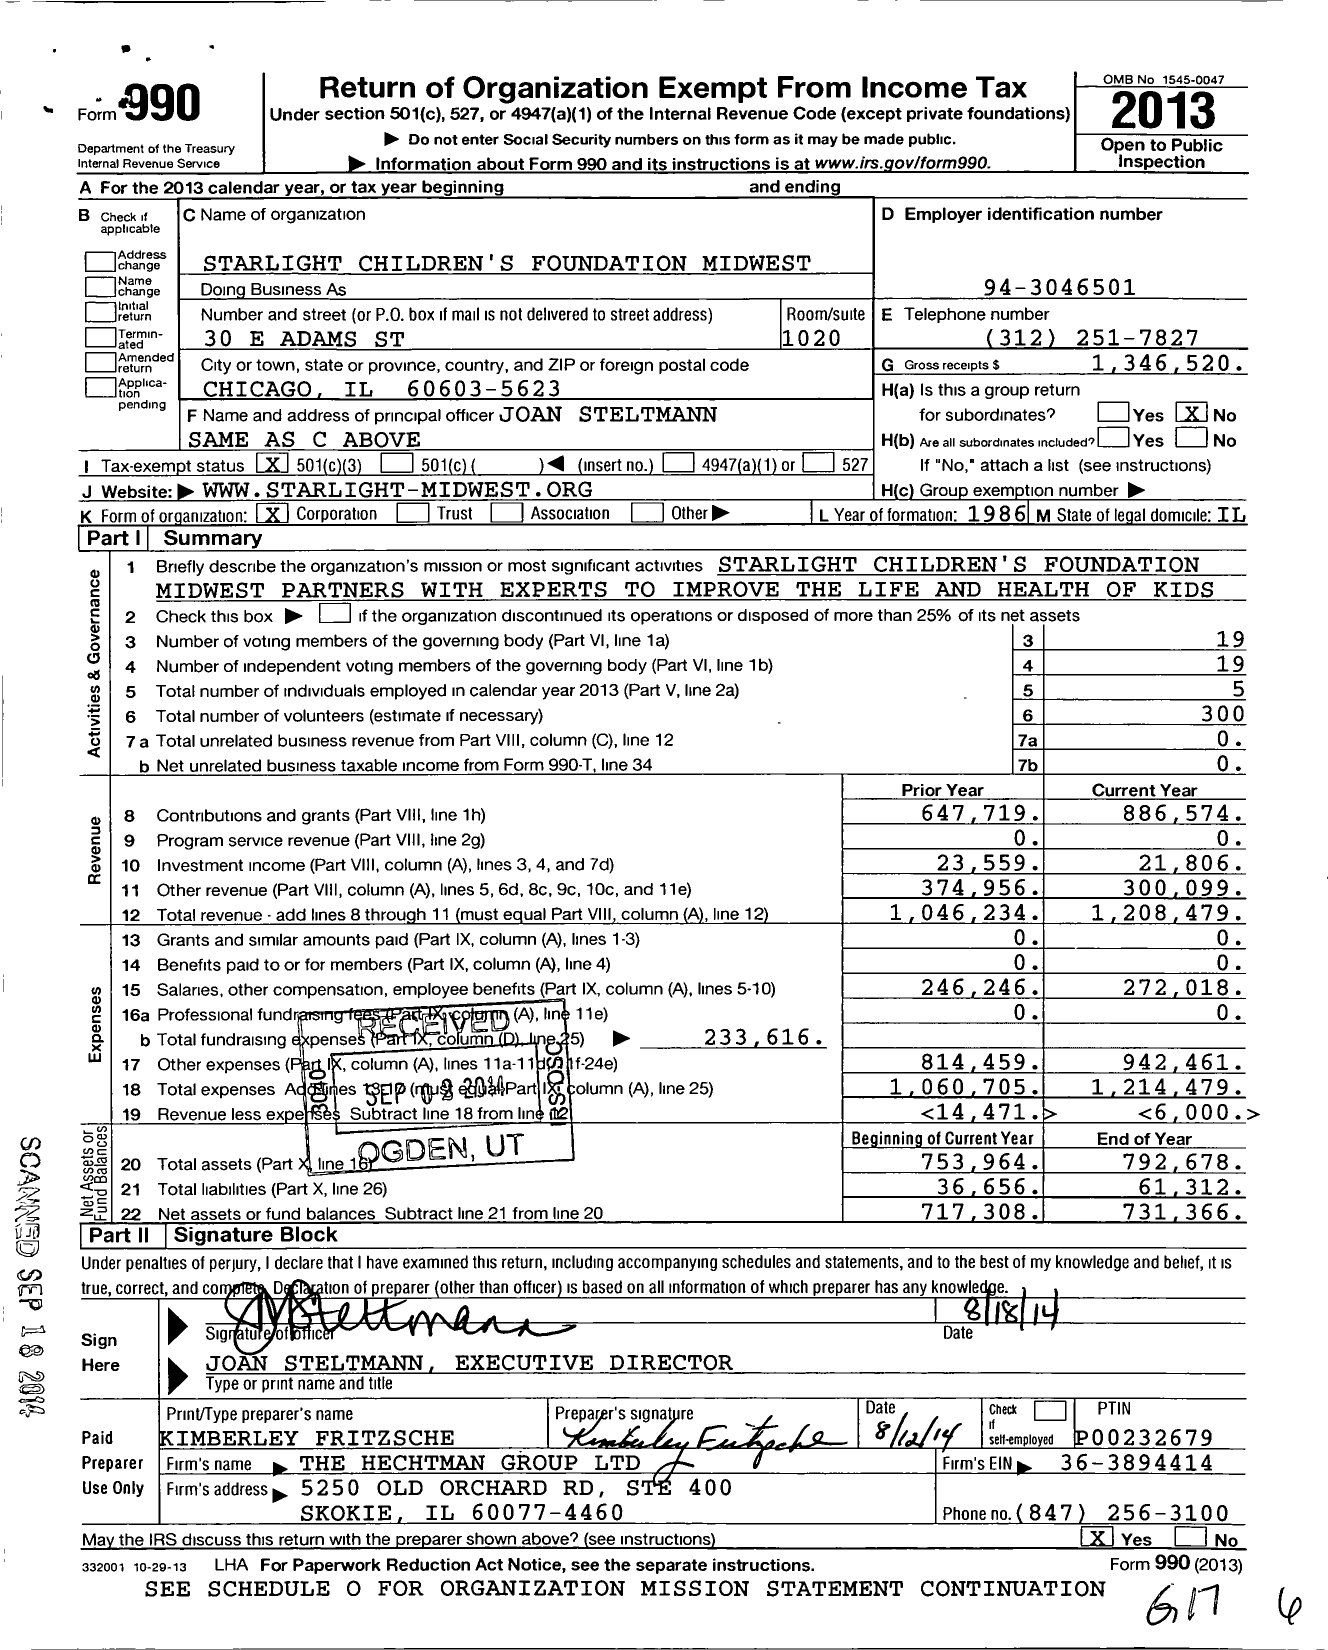 Image of first page of 2013 Form 990 for Starlight Childrens Foundation Midwest